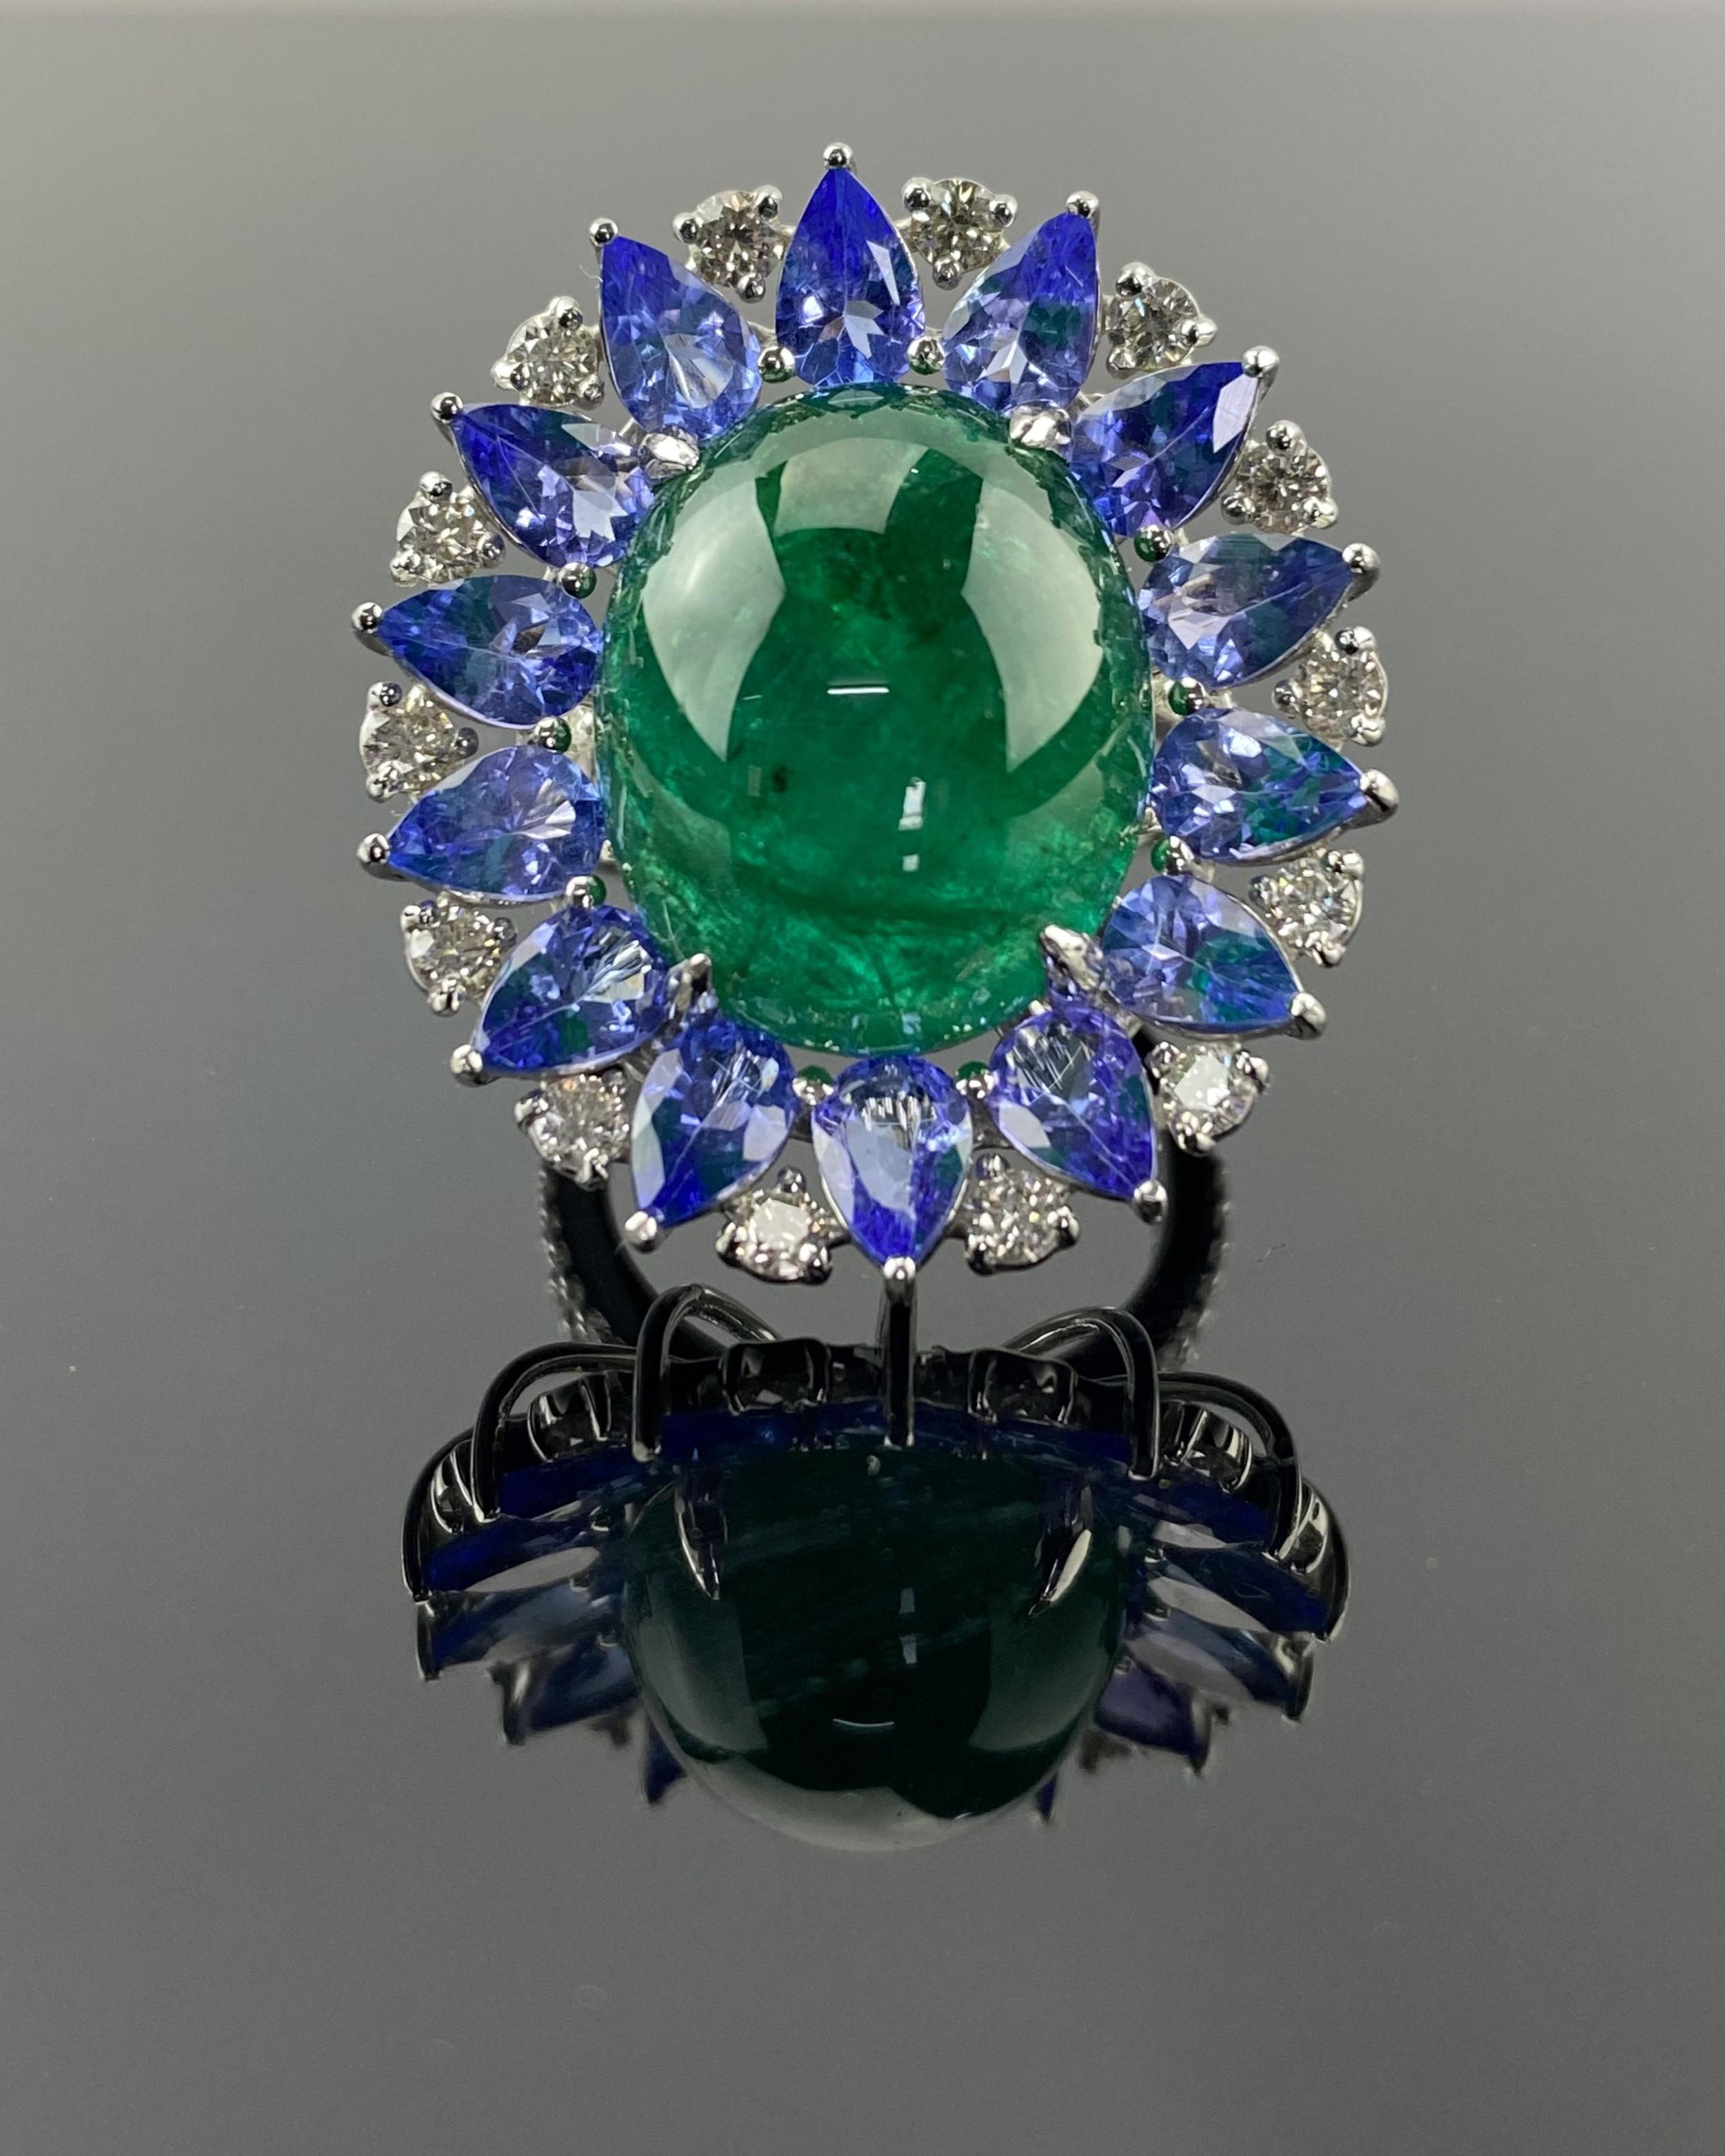 A beautiful combination of 16.62 carat oval Emerald Cabochon, 5.19 carat pear shape Tanzanite and 0.99 carat Diamond cocktail ring, set in solid 18K White Gold.
The ring is made in solid 18K White Gold, currently sized at US 7, can be resized. 
We